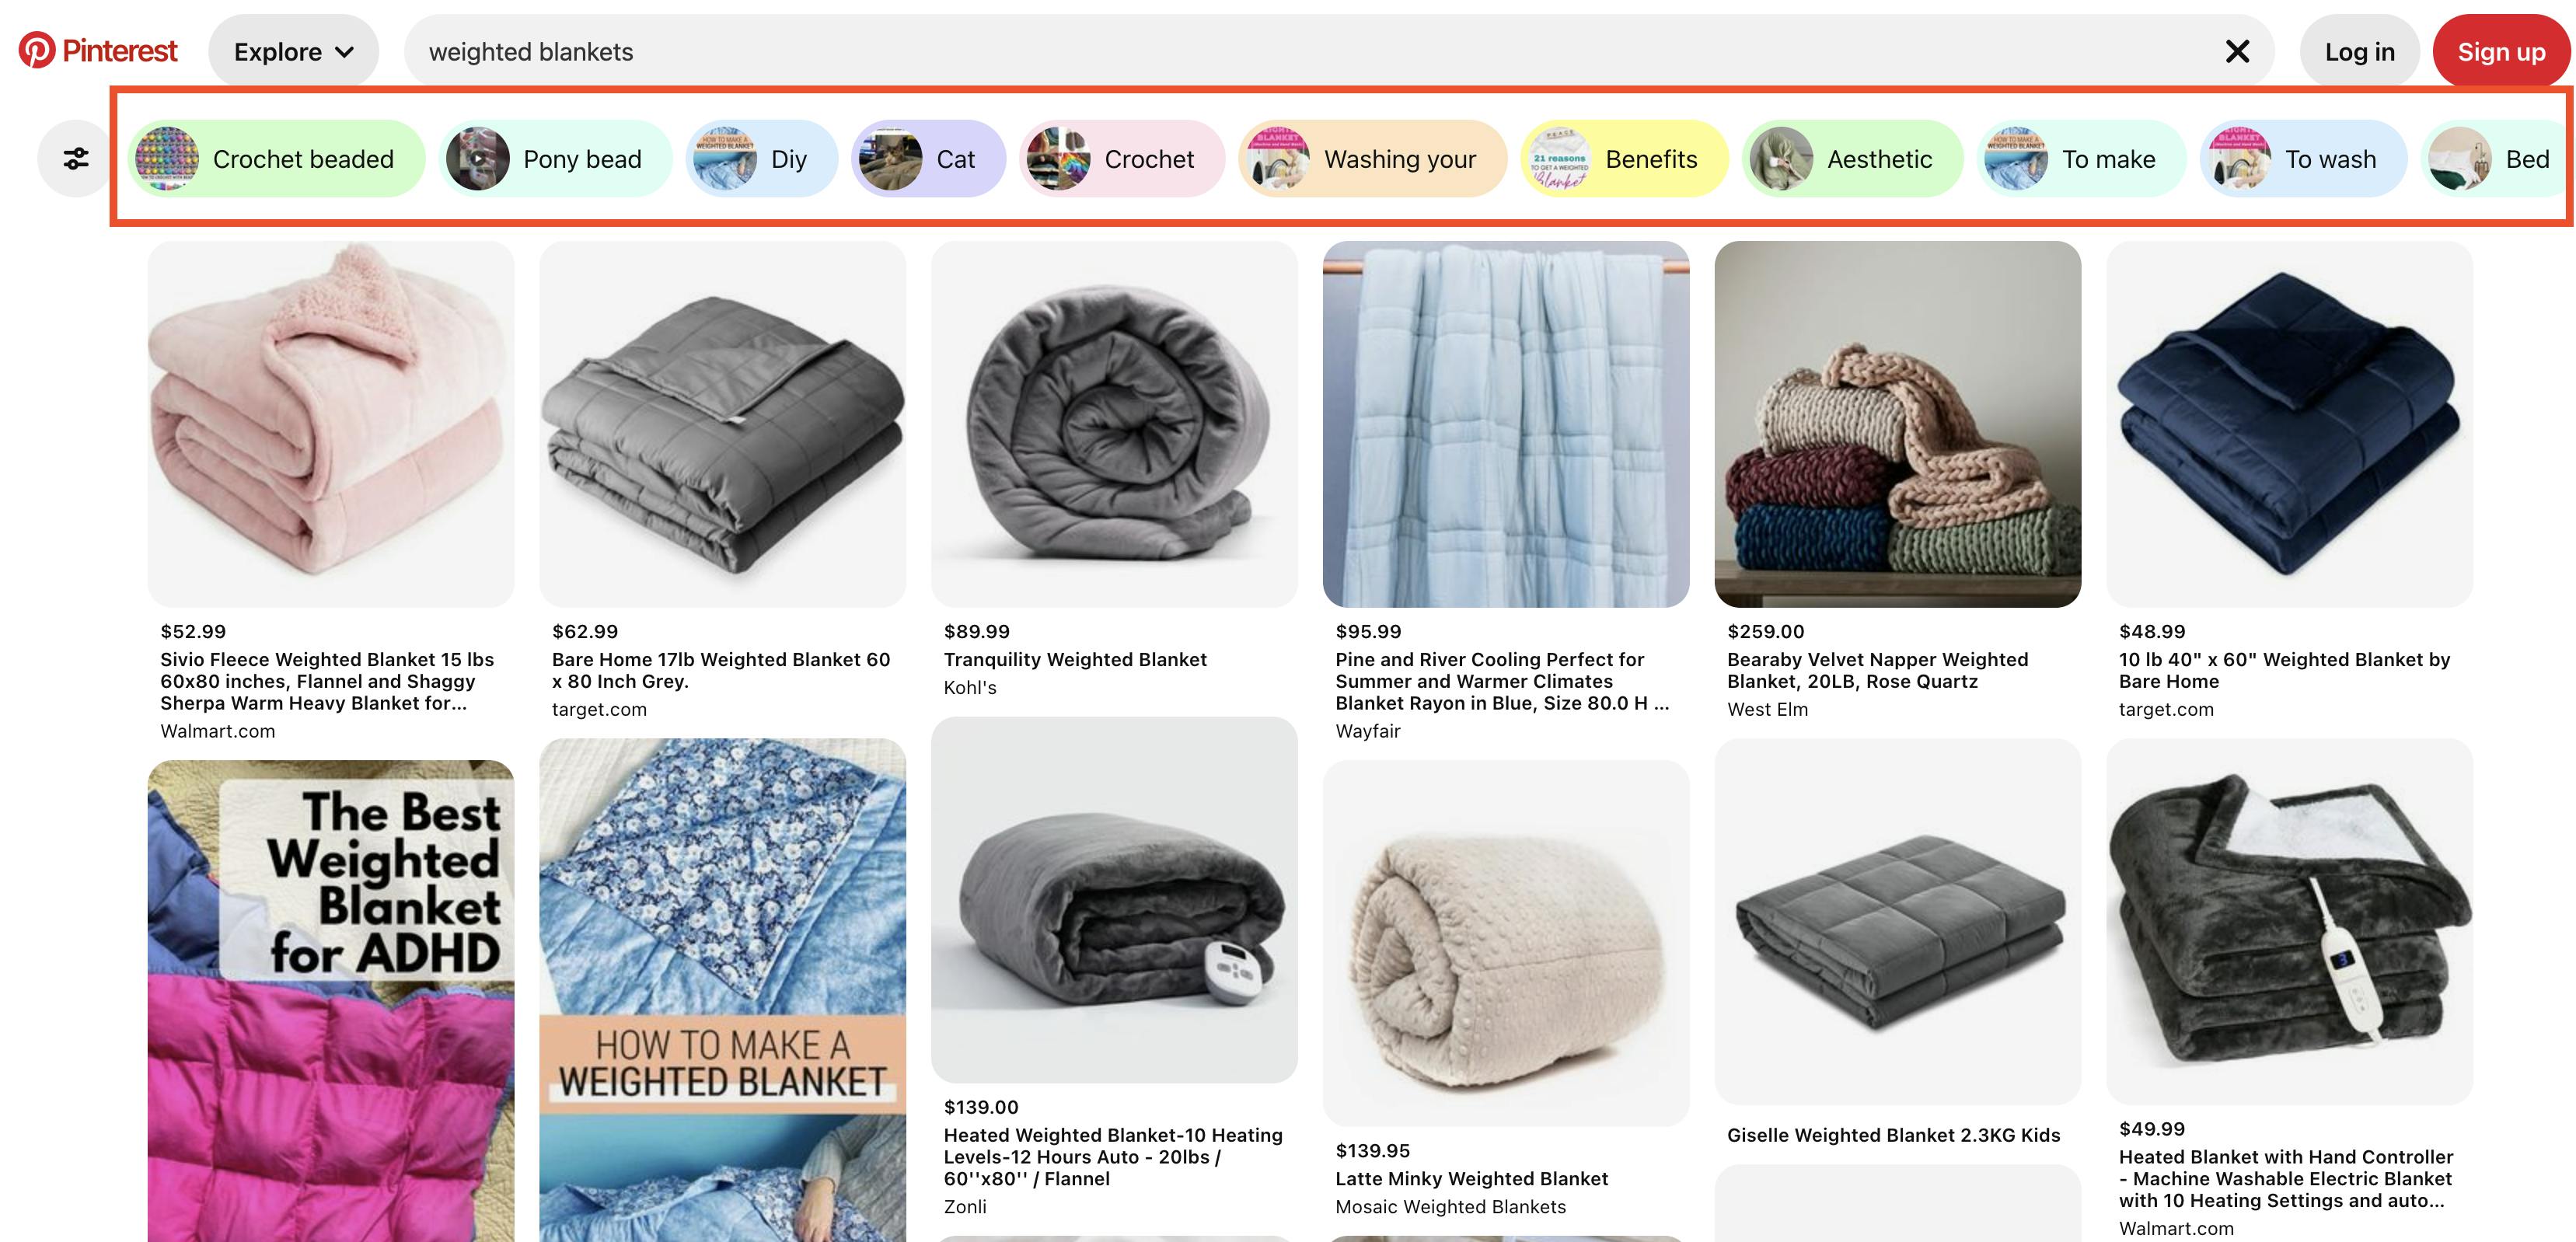 Suggested searches related to "weighted blankets" on Pinterest